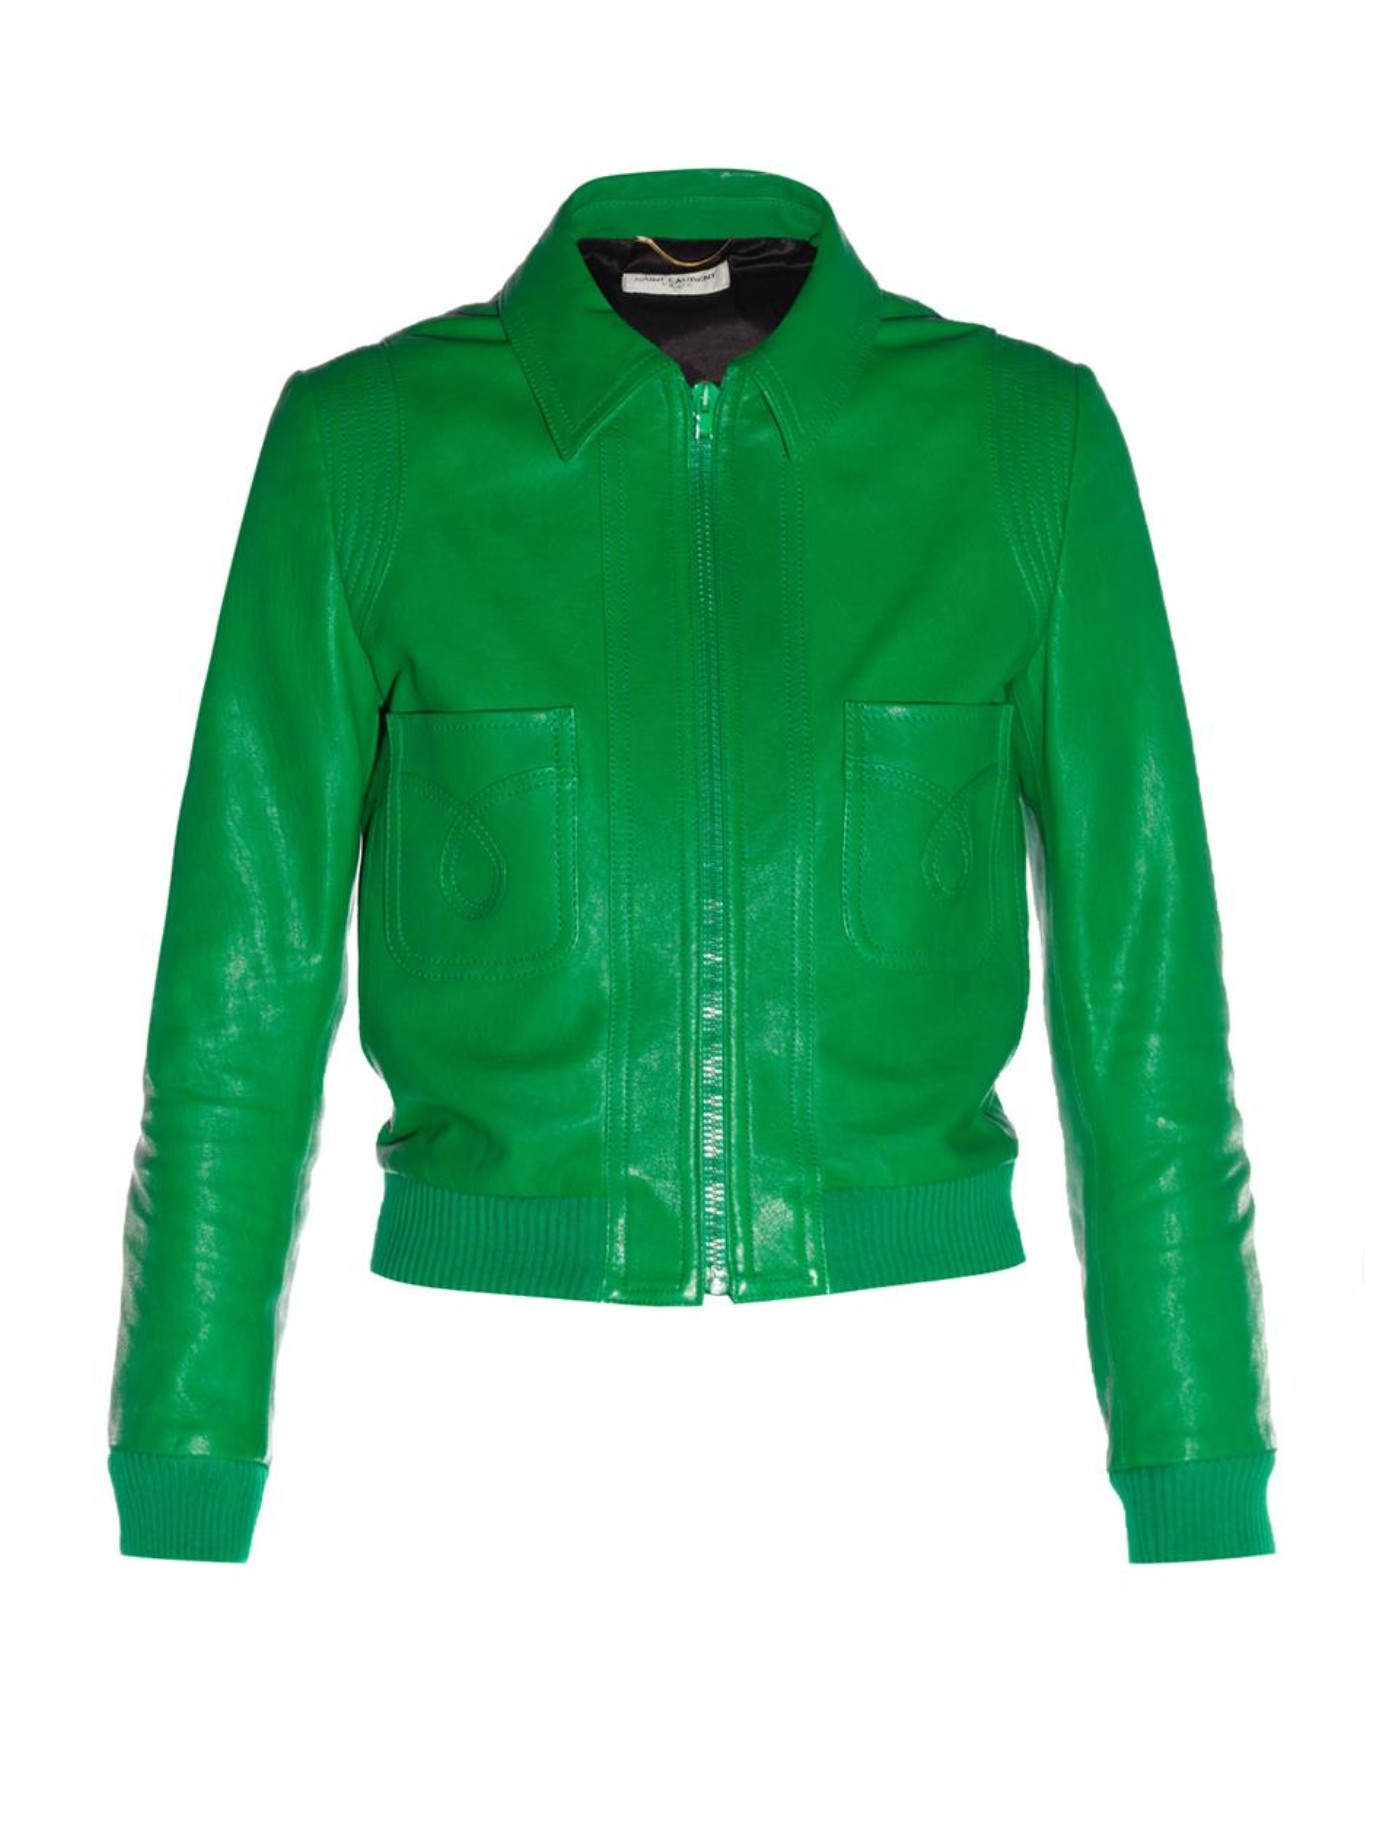 Saint Laurent Leather Bomber Jacket in Green | Lyst Canada